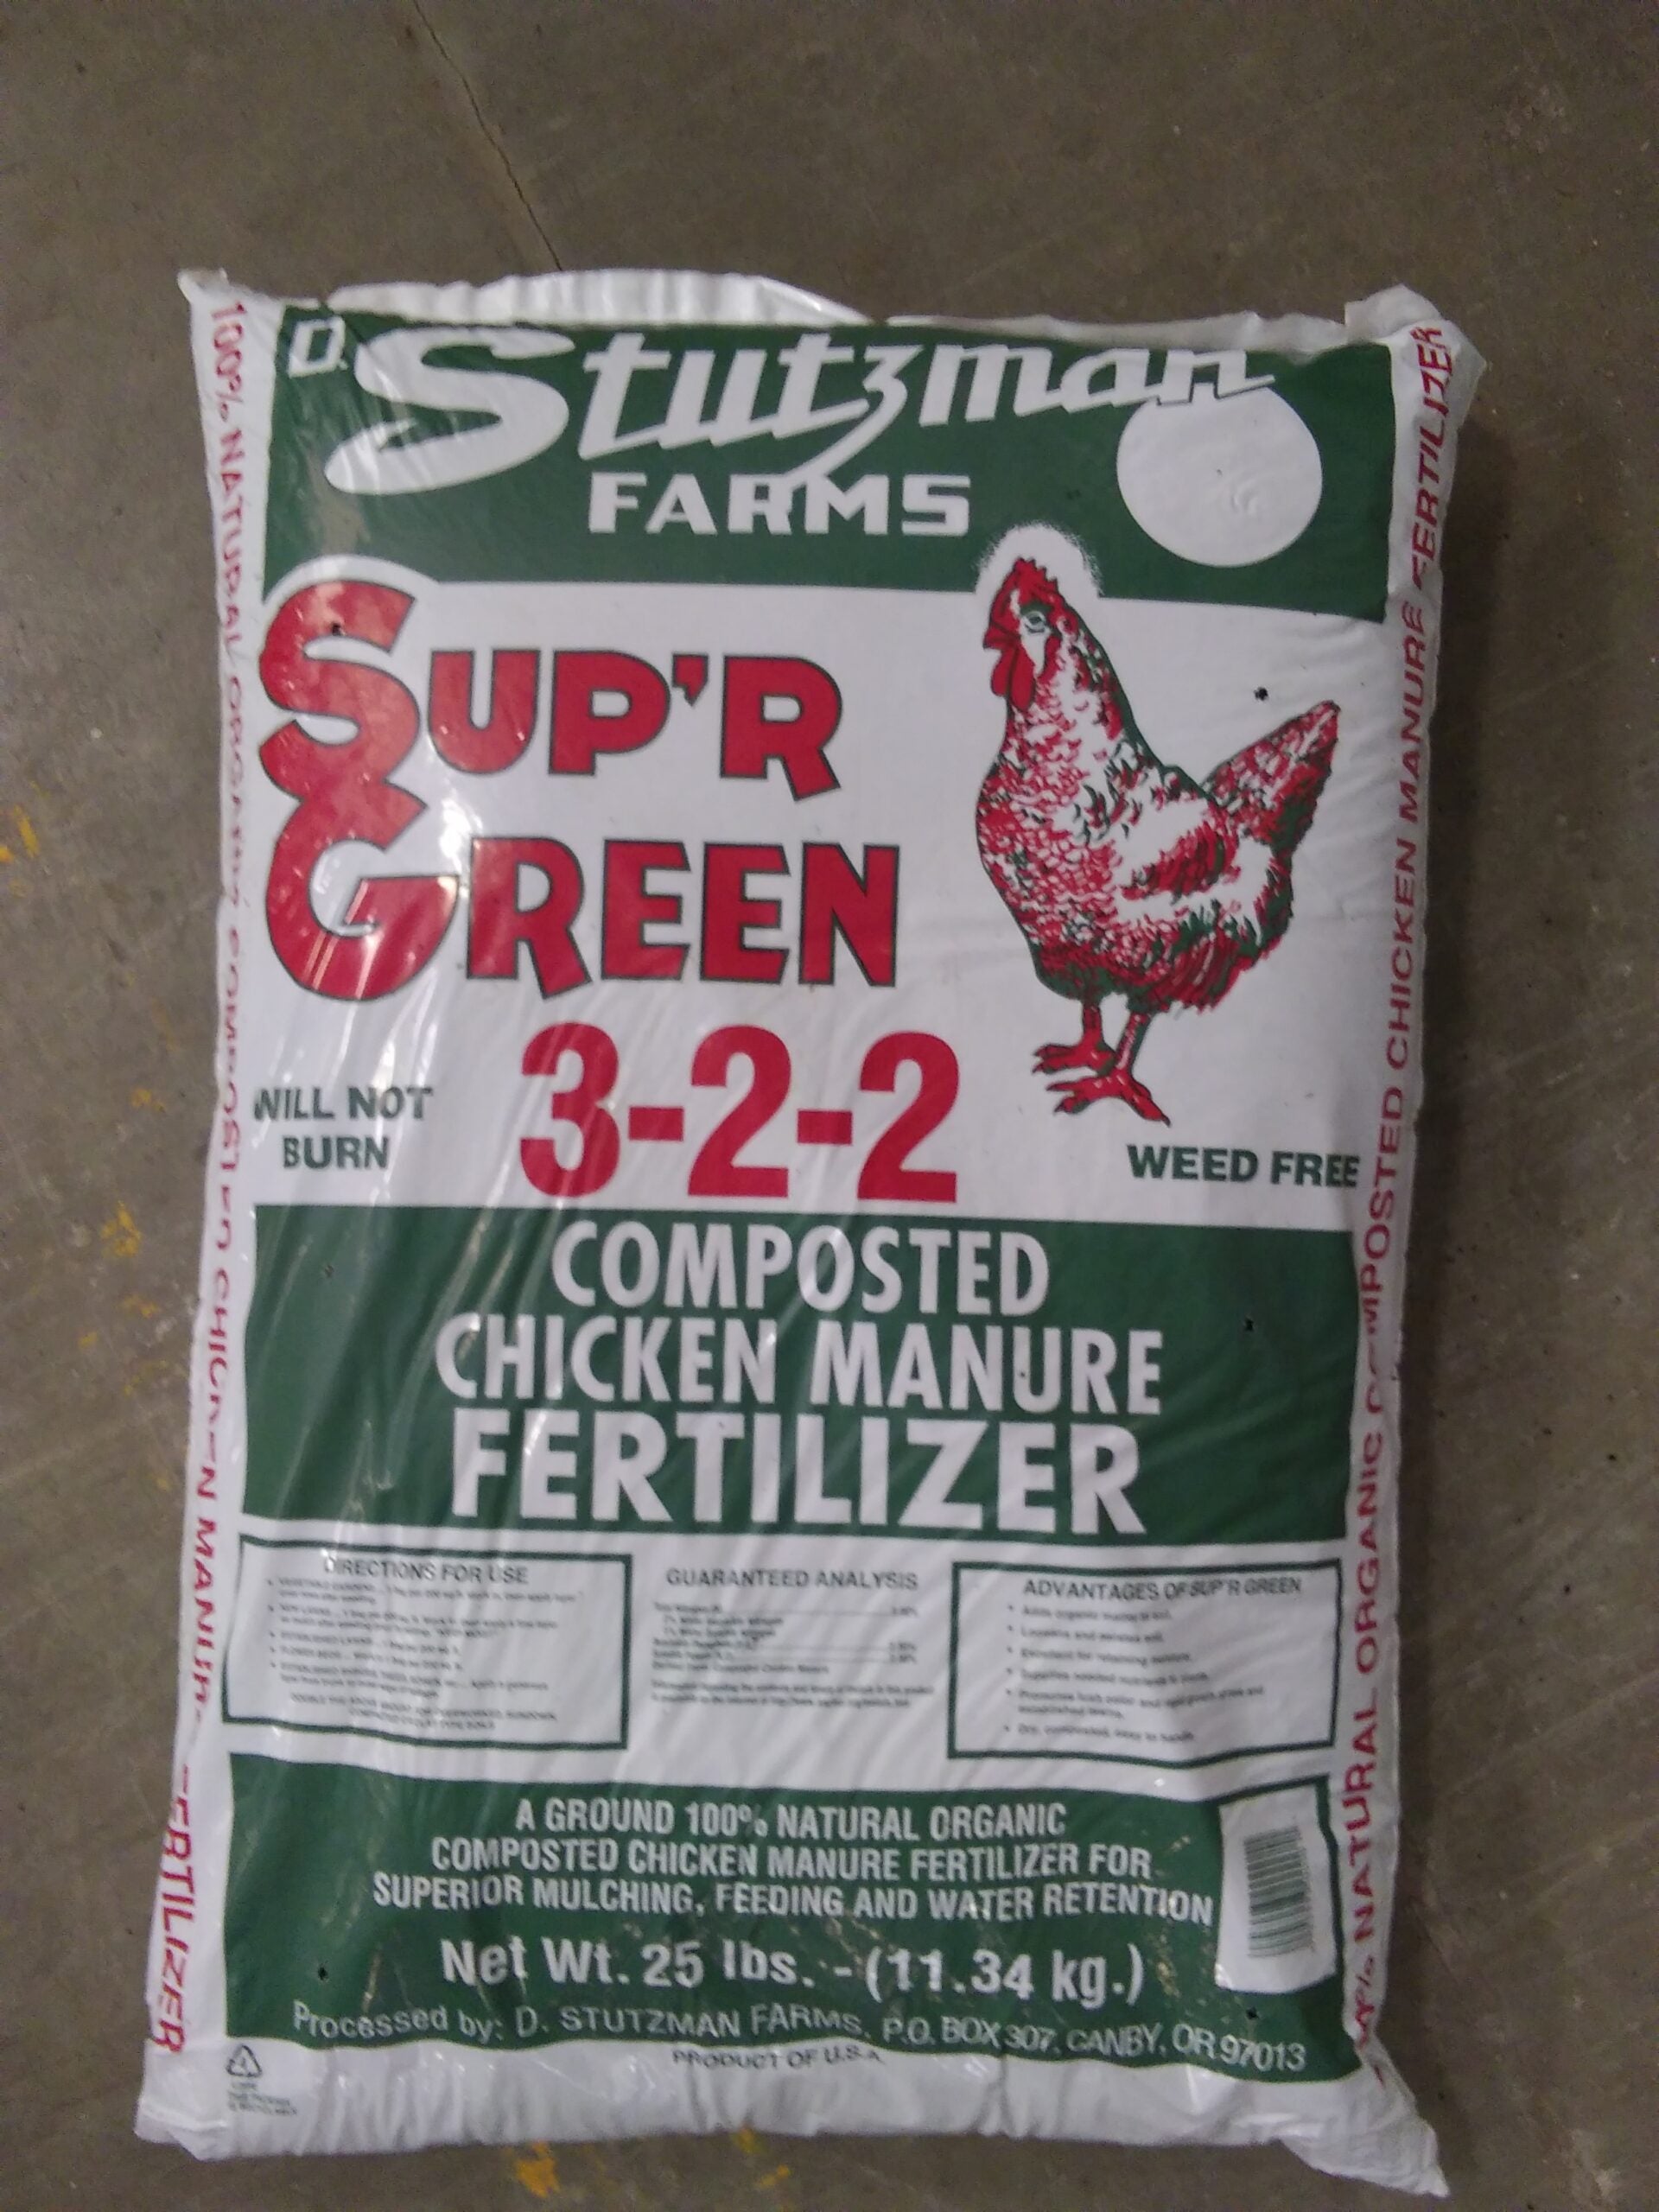 A white and green bag with a red drawing of a chicken.